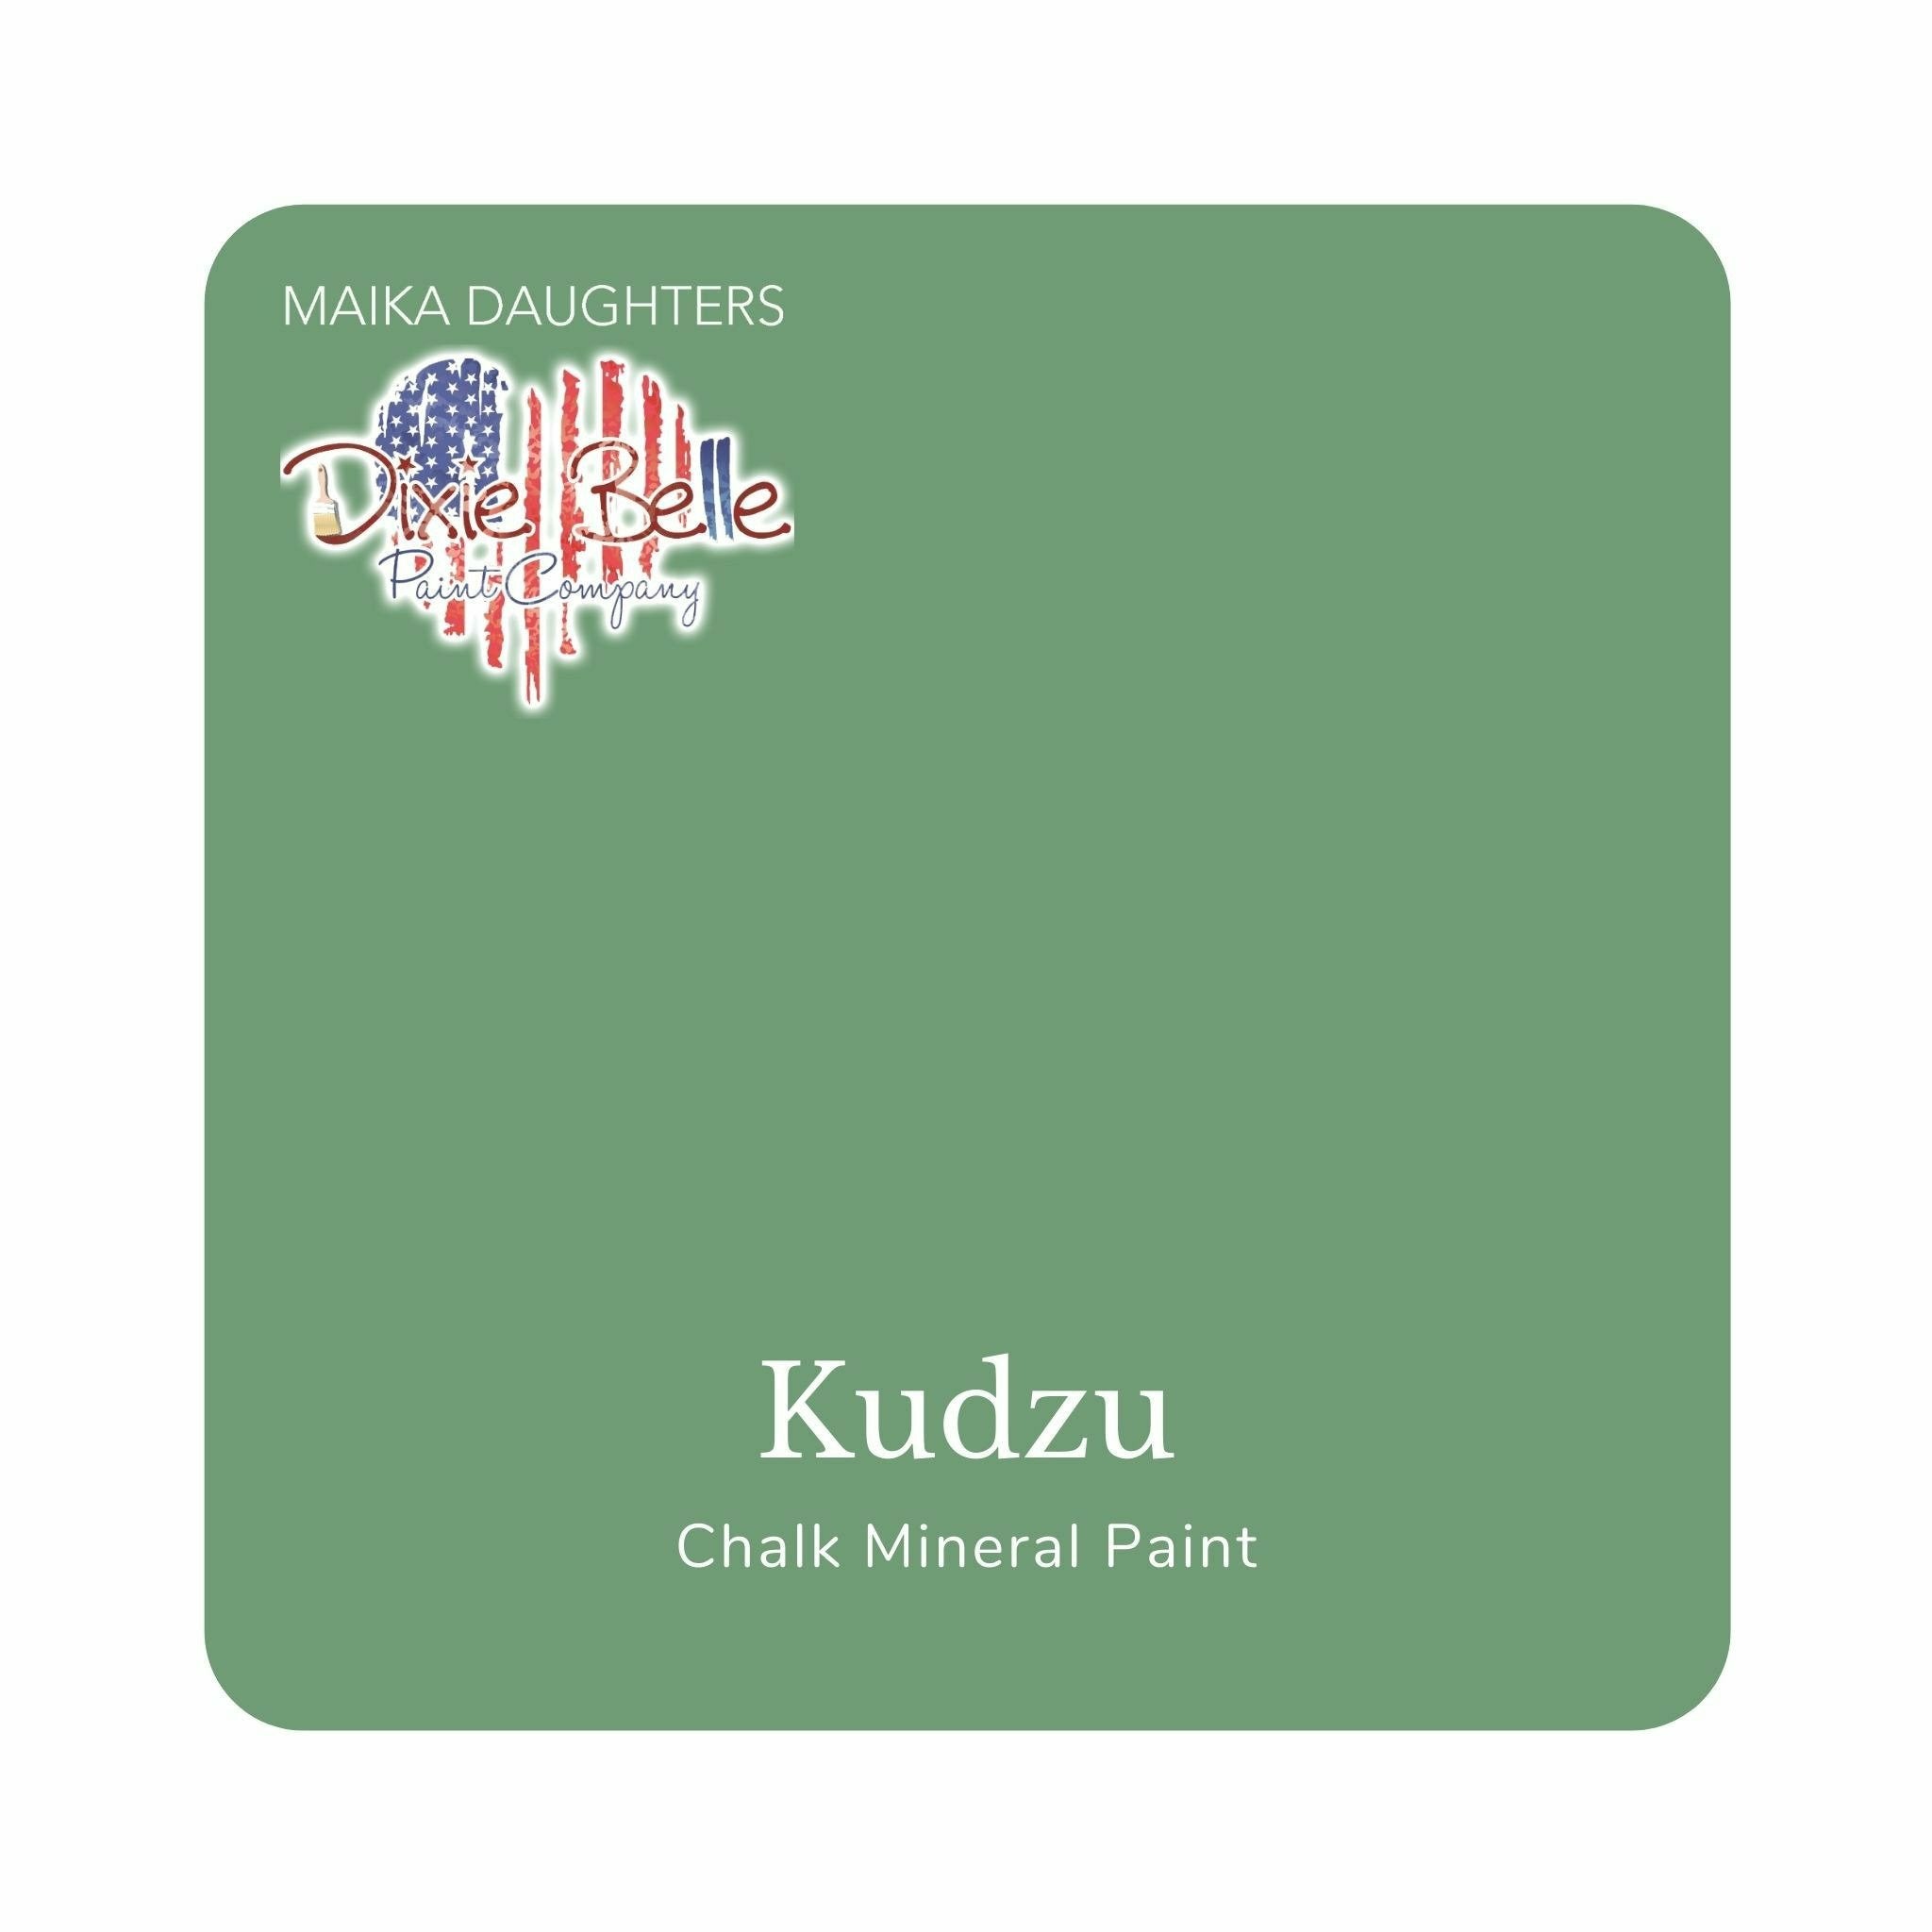 A square swatch card of Dixie Belle Paint Company’s Kudzu Chalk Mineral Paint is against a white background. This color is a light melon green.